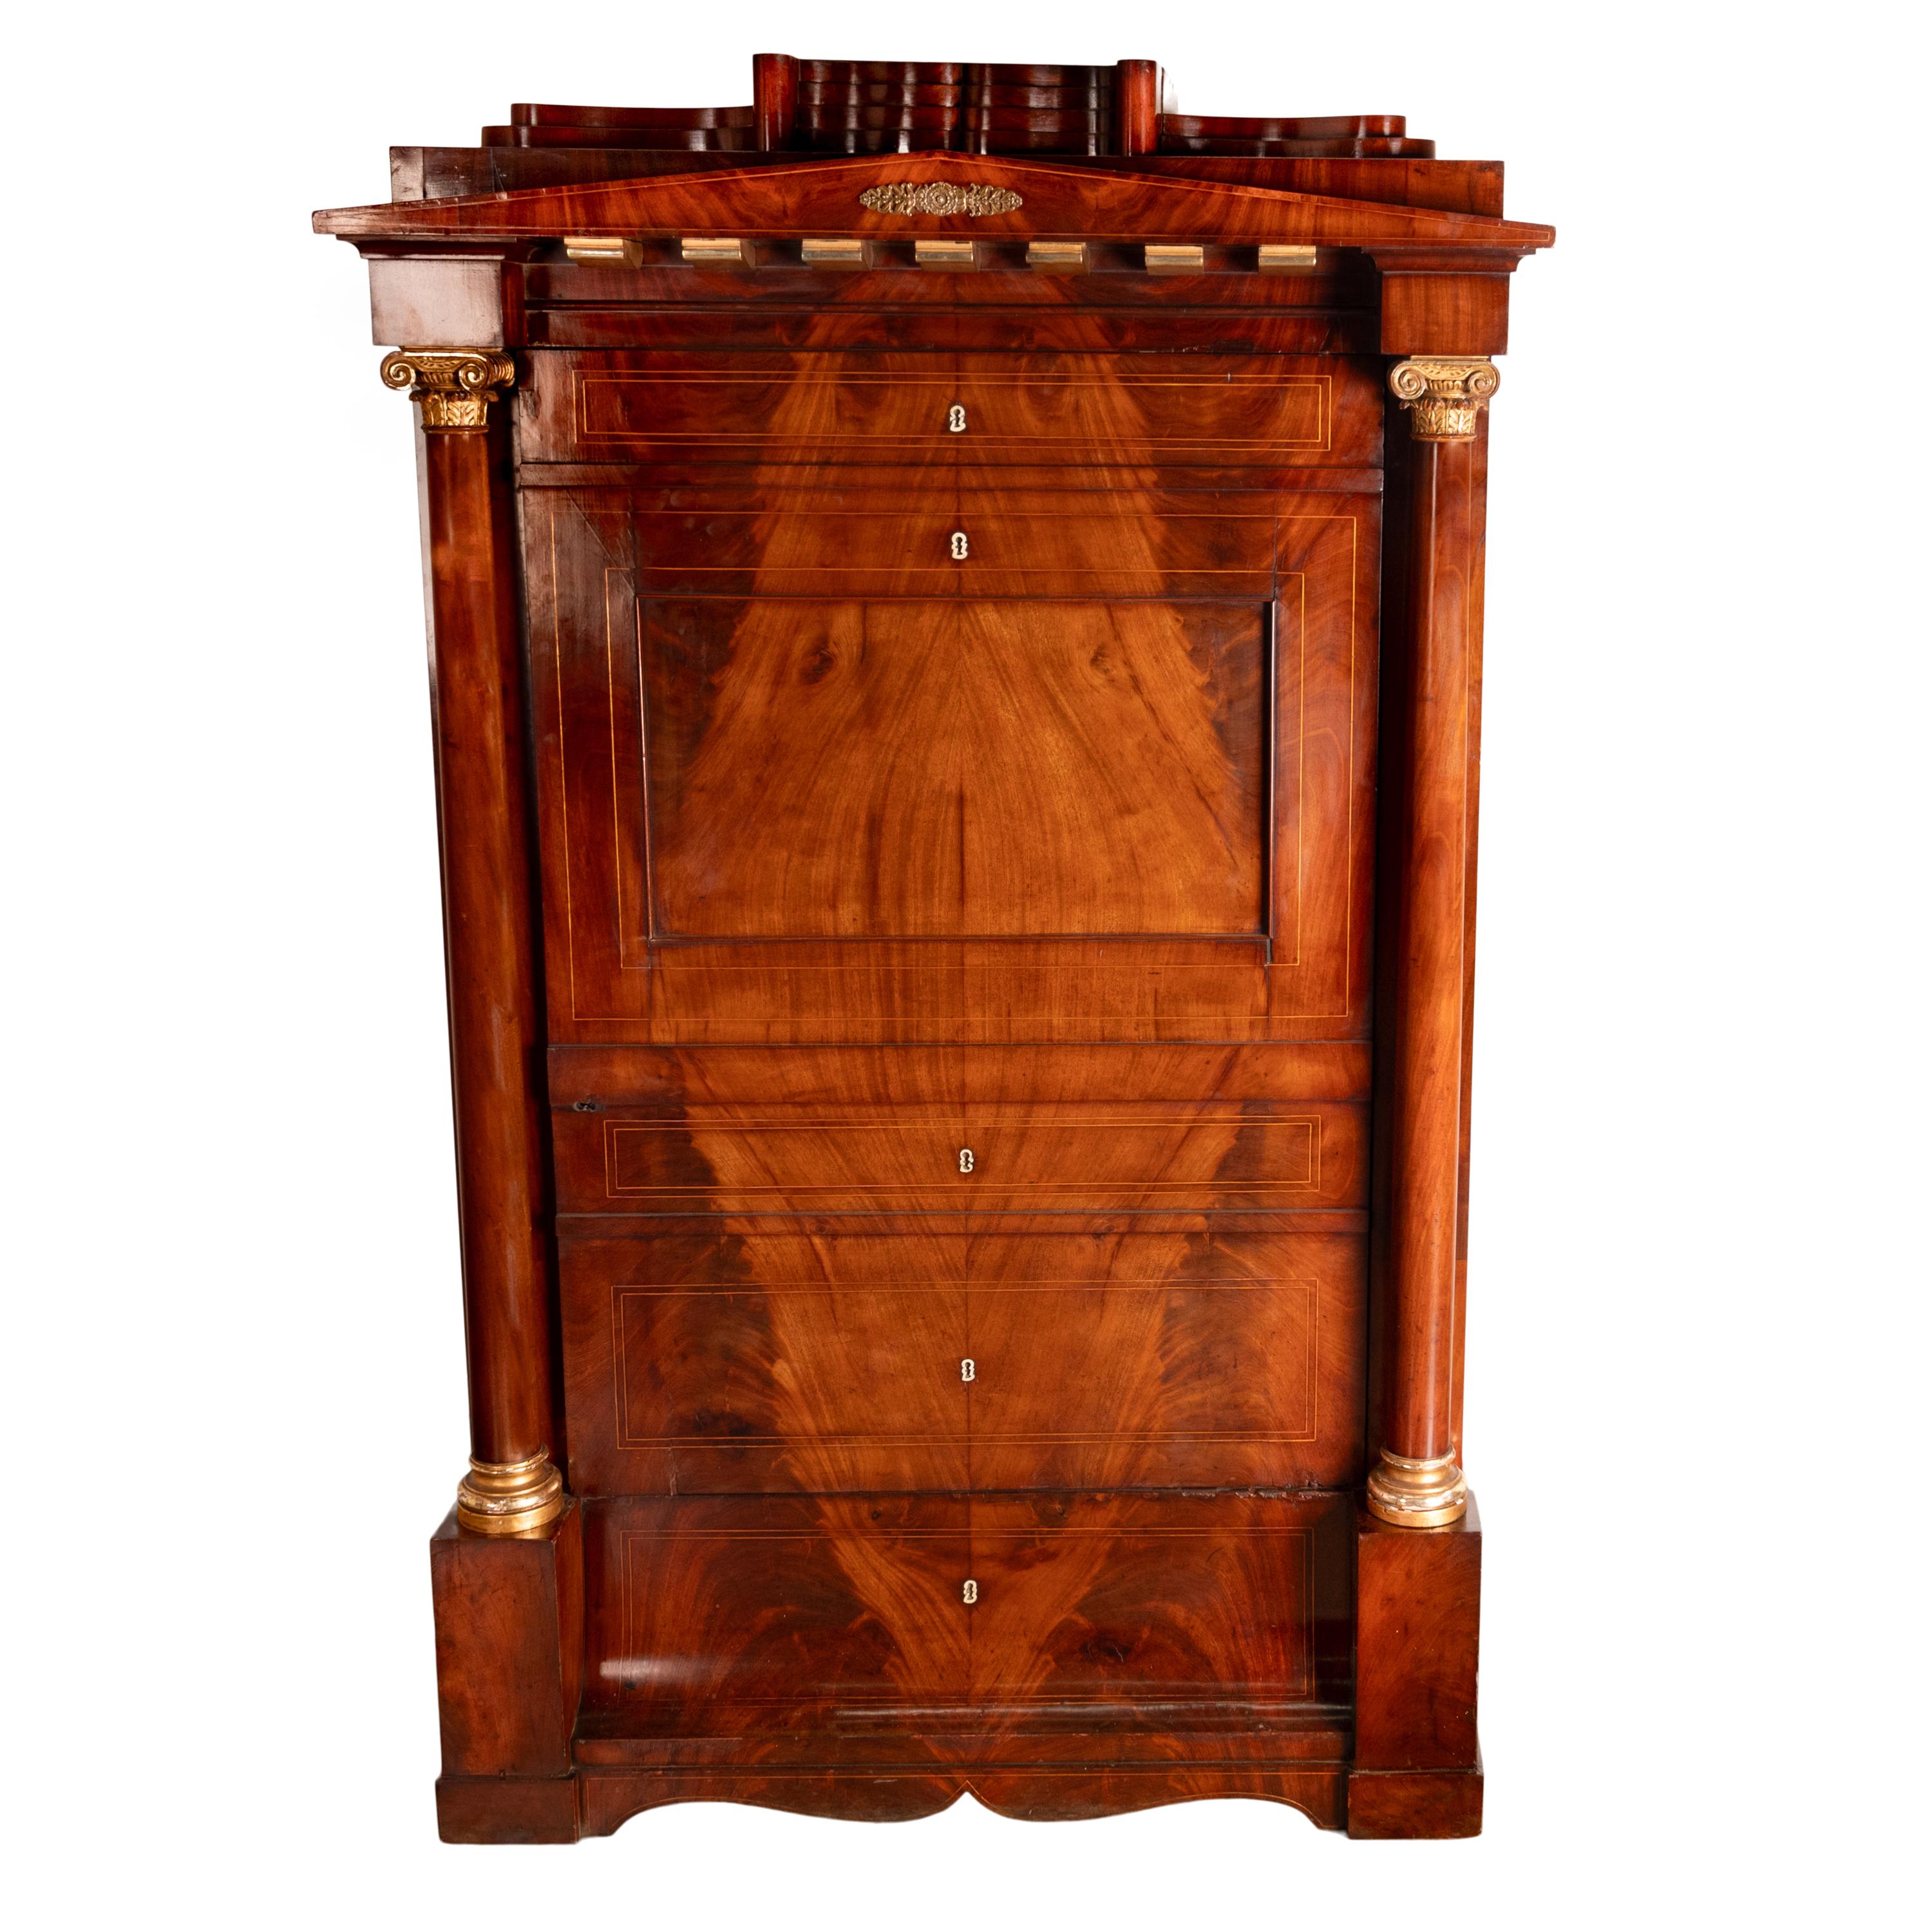 A very fine quality French Empire Napoleonic period Mahogany & parcel gilt wine cabinet/armoire, circa 1810.
Made of the finest mahogany this cabinet has the shape of a secretaire abattant but is in fact a compact armoire cabinet, concealed to the